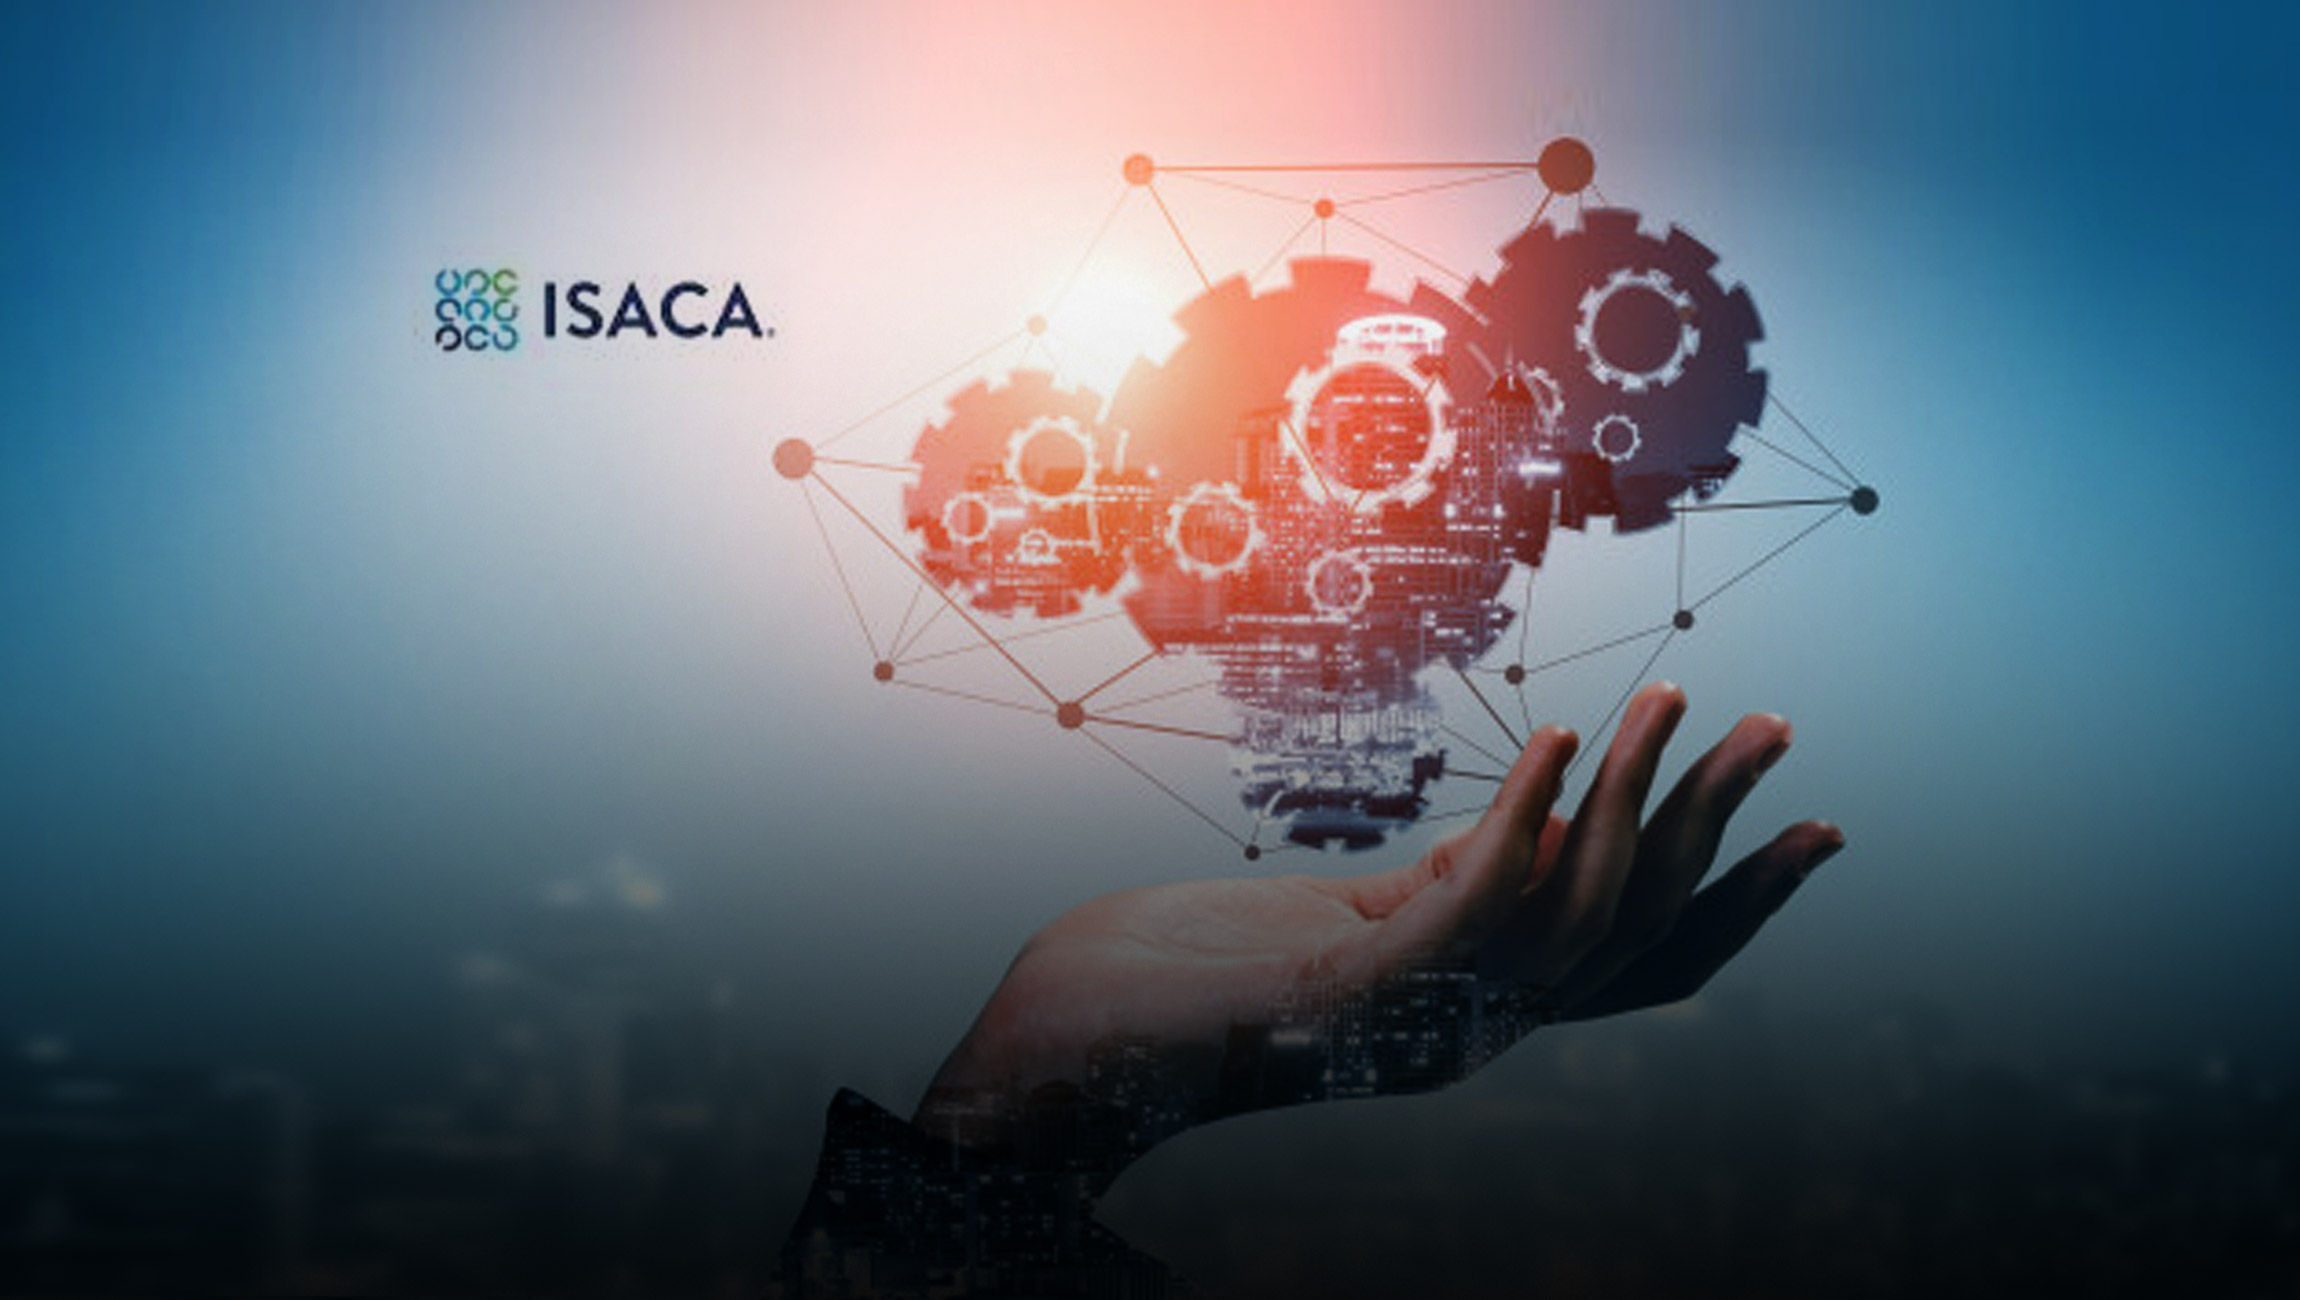 Nearly 1 in 3 consumers stopped doing business with a company known to have compromised cybersecurity, says new ISACA study